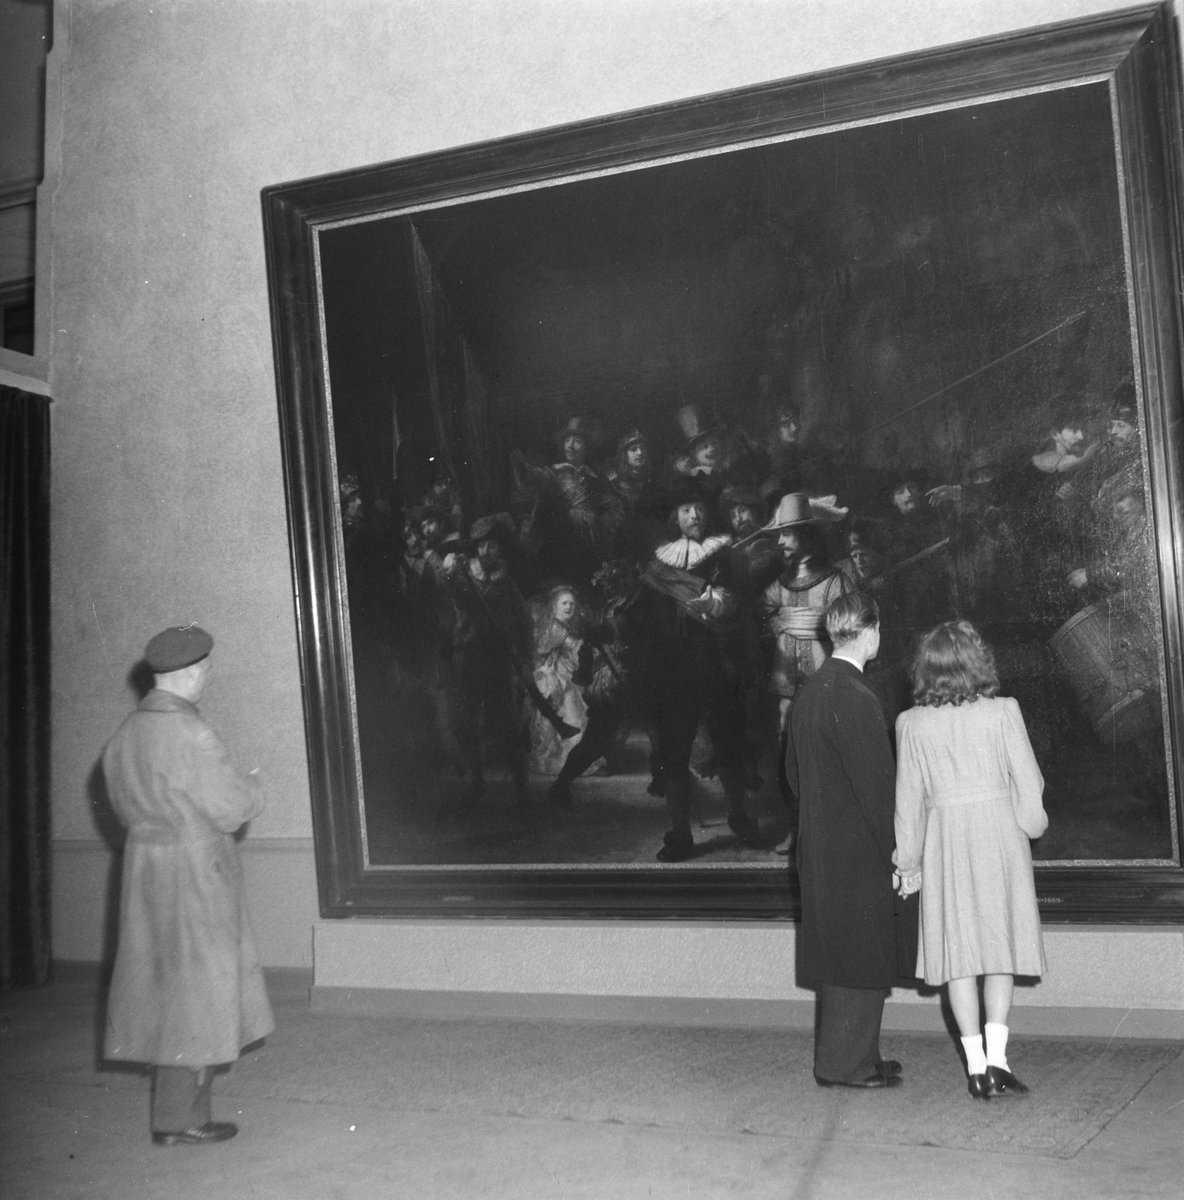 The Rijksmuseum re-opened its doors on 15 July 1945, after the end of World War II. The museum was mostly closed during the war, and the collection was evacuated. As many as 165,000 people visited the first exhibition 'Reunion with the Masters'. 🚨 rijksmuseum.nl/en/stories